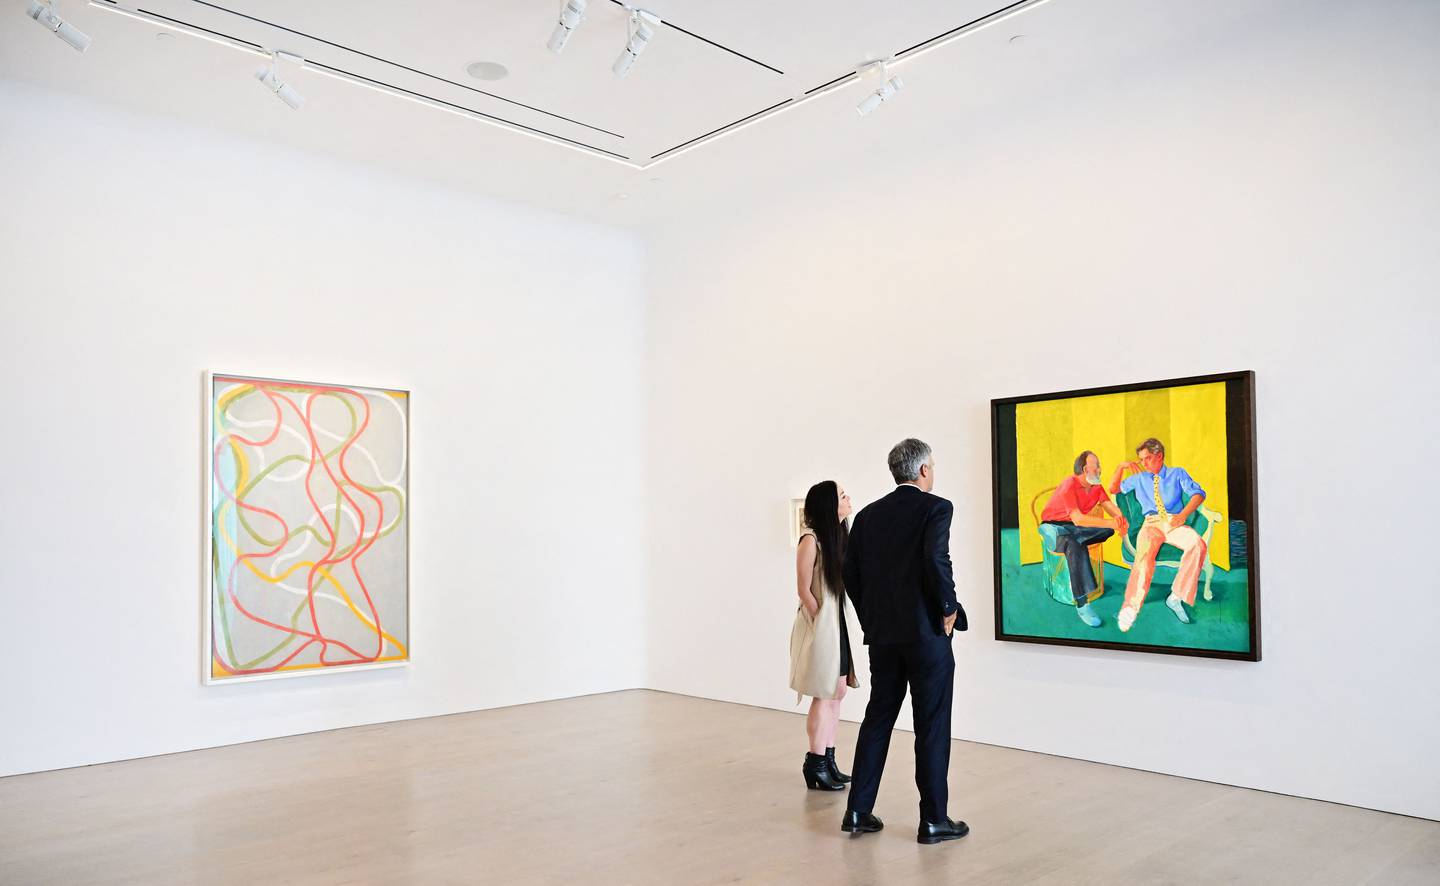 Alex Marshall, senior specialist and senior vice president at Christie's, views 'The Conversation' by David Hockney displayed beside 'The Attended' by Brice Marden during the media preview of Paul Allen's art Collection. AFP